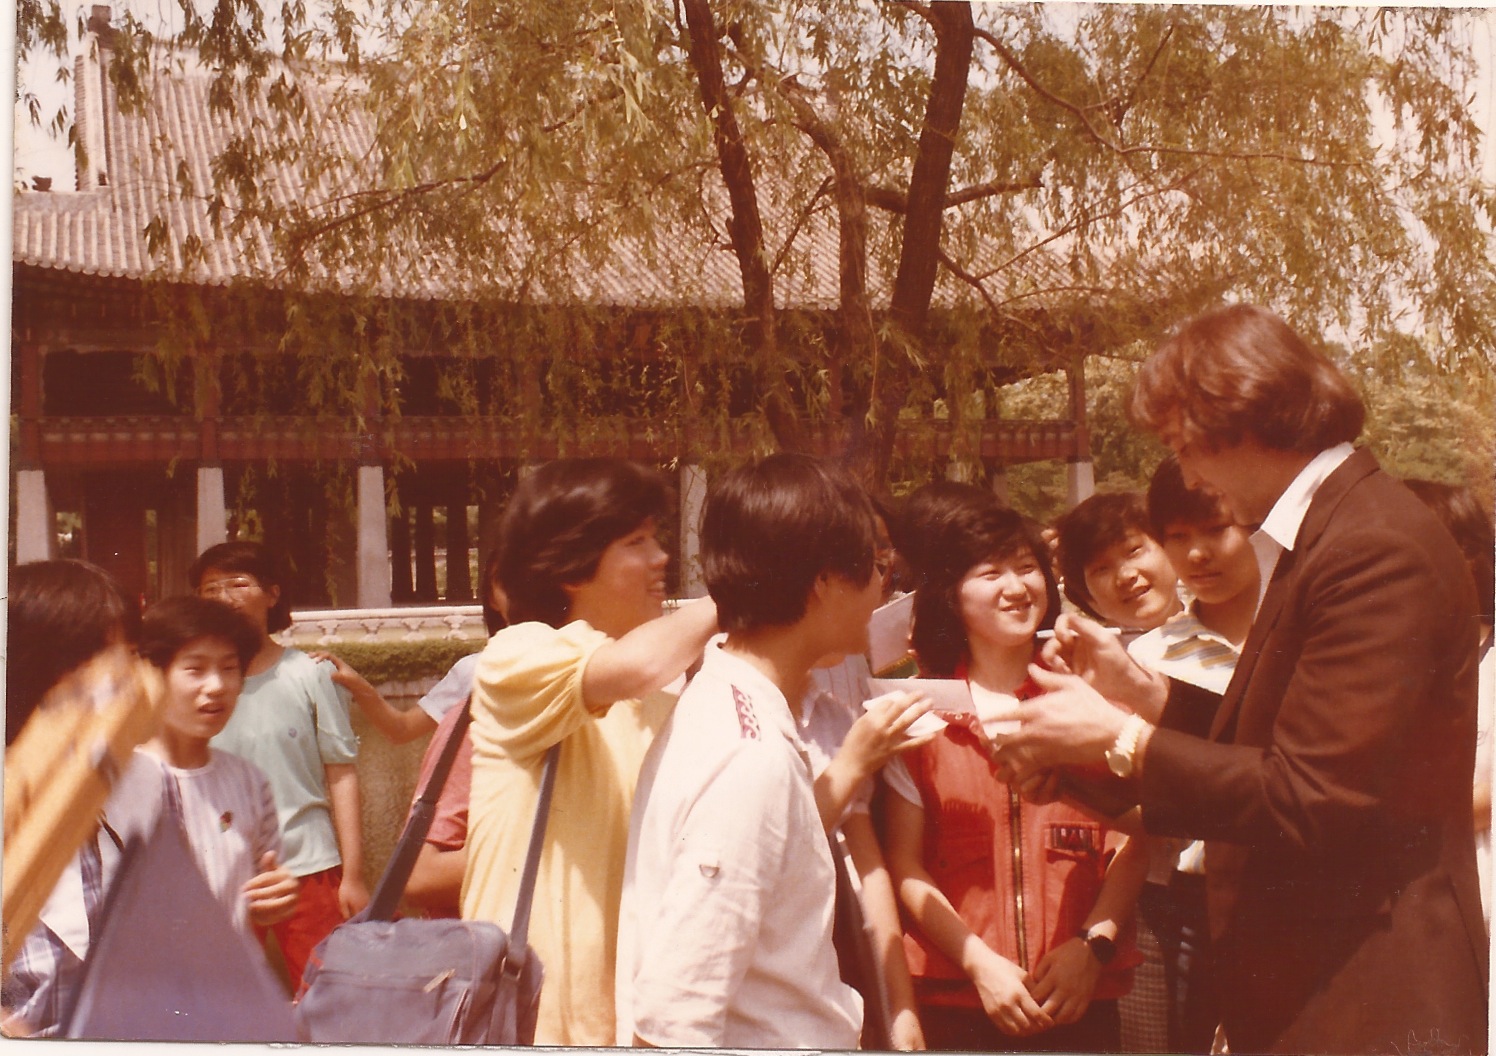 Signing autographs for a few Korean Kids. 1985.